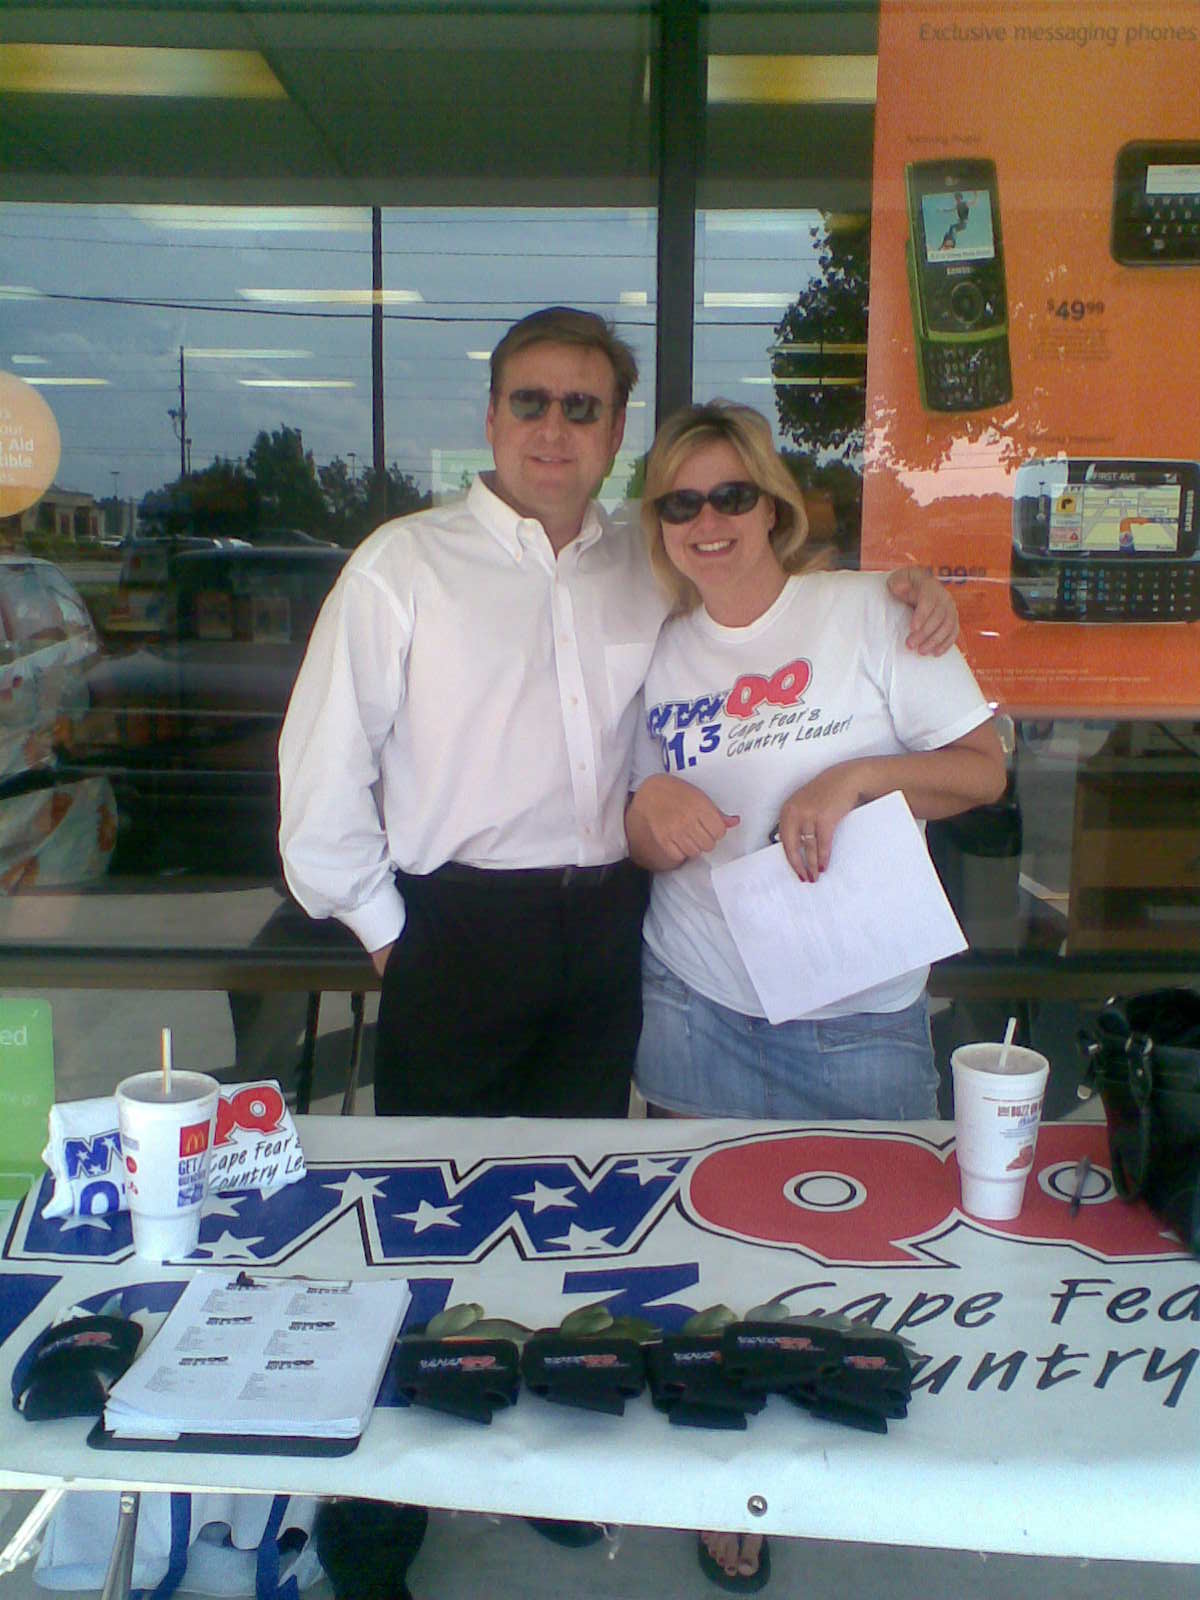 PATT NODAY: (left) at a personal live appearance for AT&T in Wilmington, NC, with popular morning country radio personality, Linda Wylde.